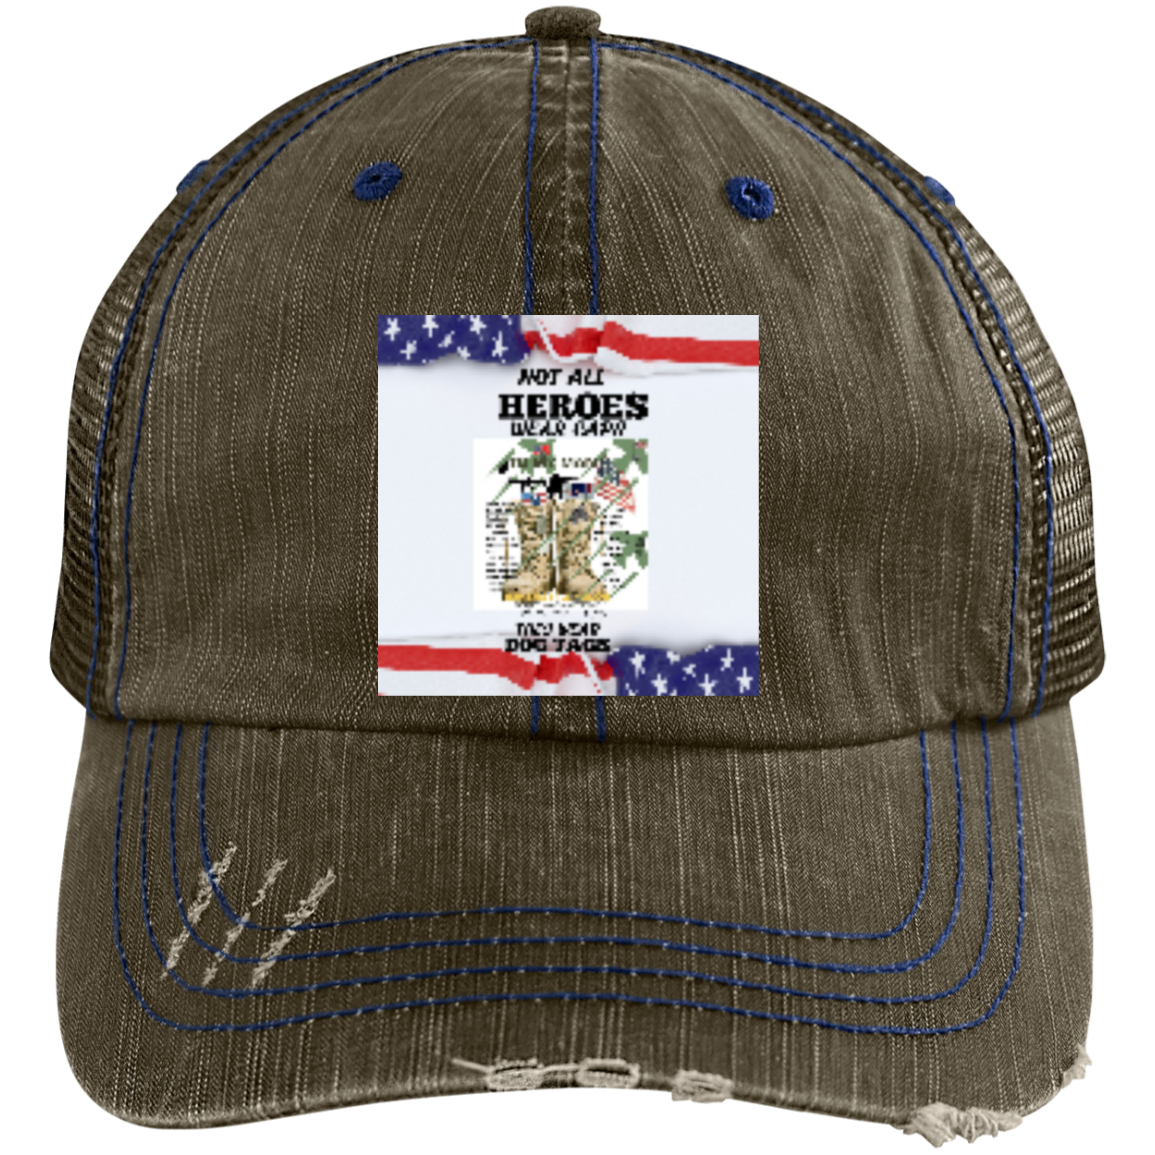 NOT ALL HEROES WEAR HATS-DOG TAG-6990 Distressed Unstructured Trucker Cap